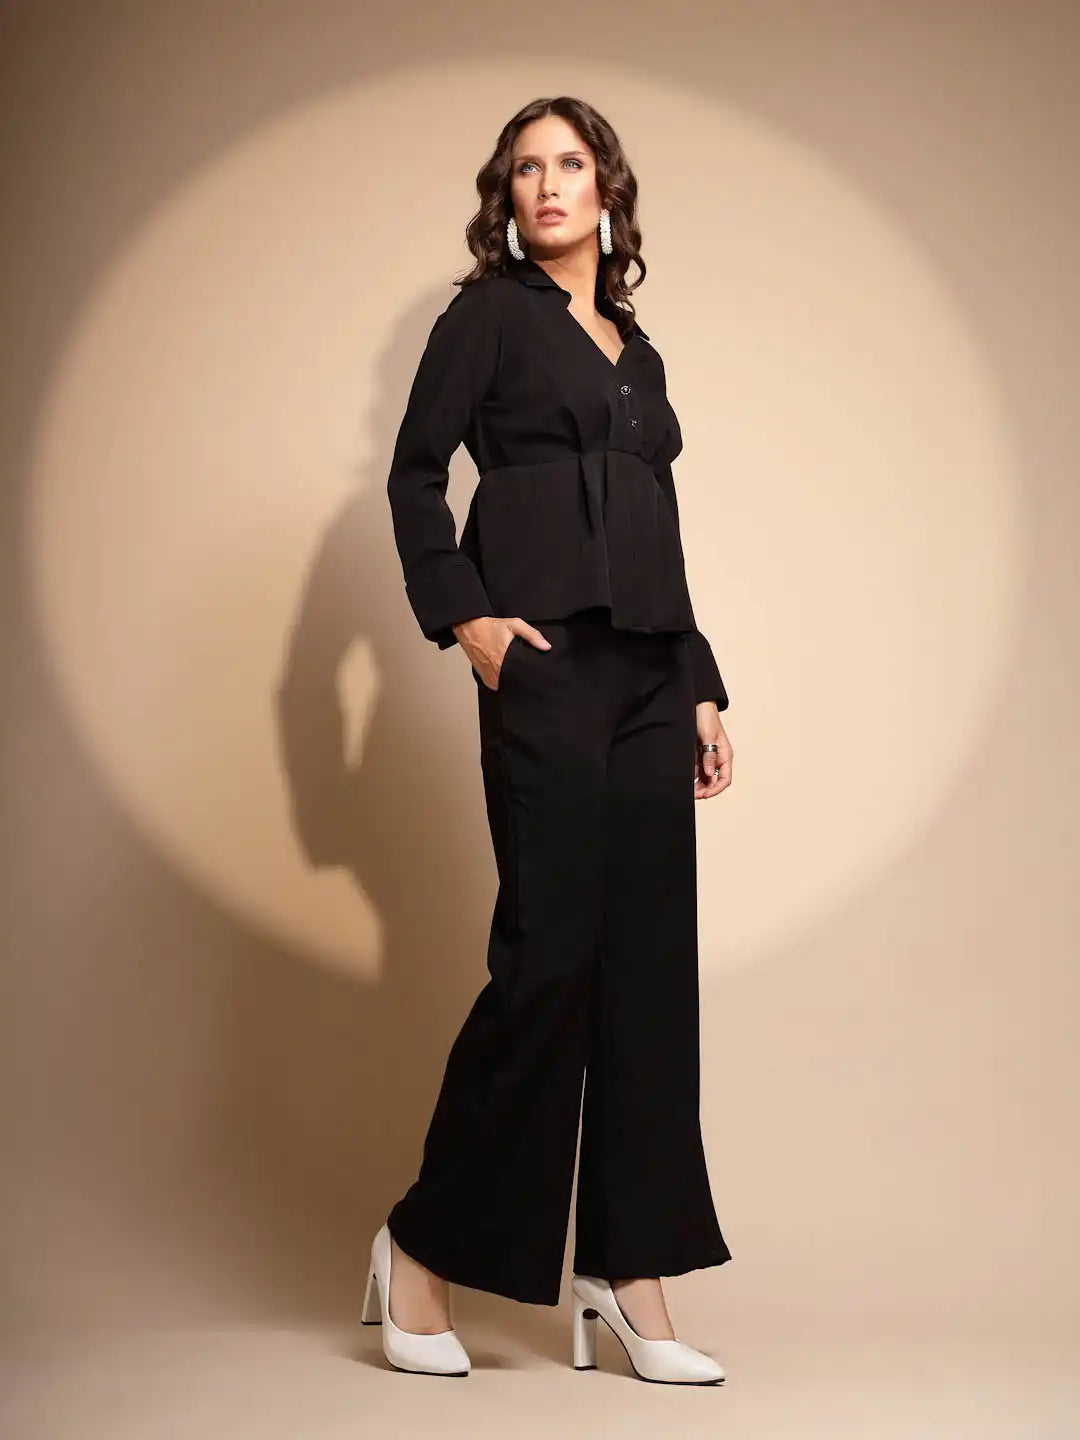 Women's Solid Collared Neck Black Co ord Set